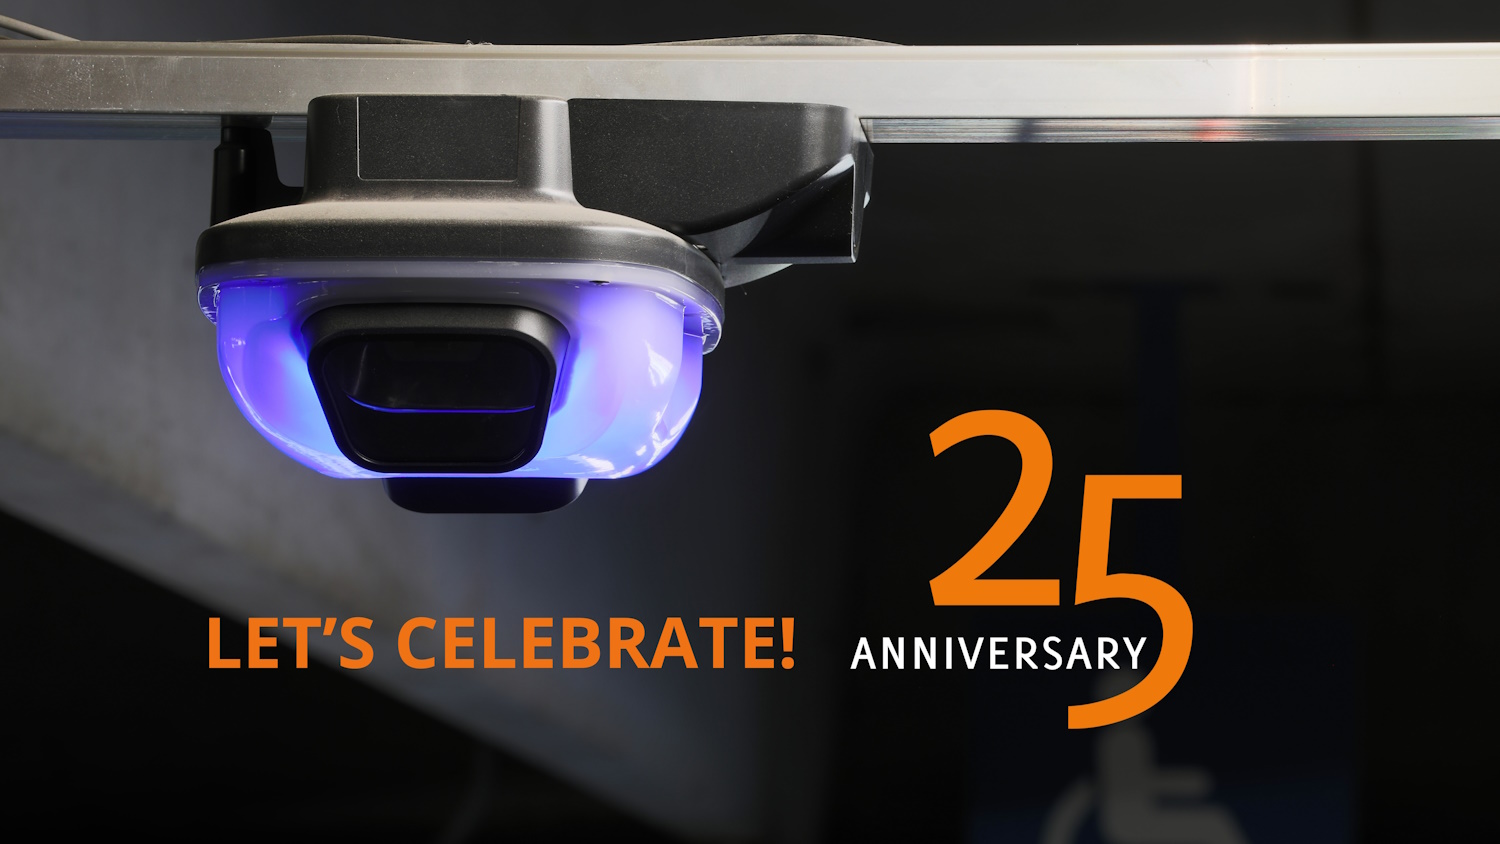 The celebration of Quercus Technologies’ anniversary is a major landmark that stands for the company’s commitment to excellence.